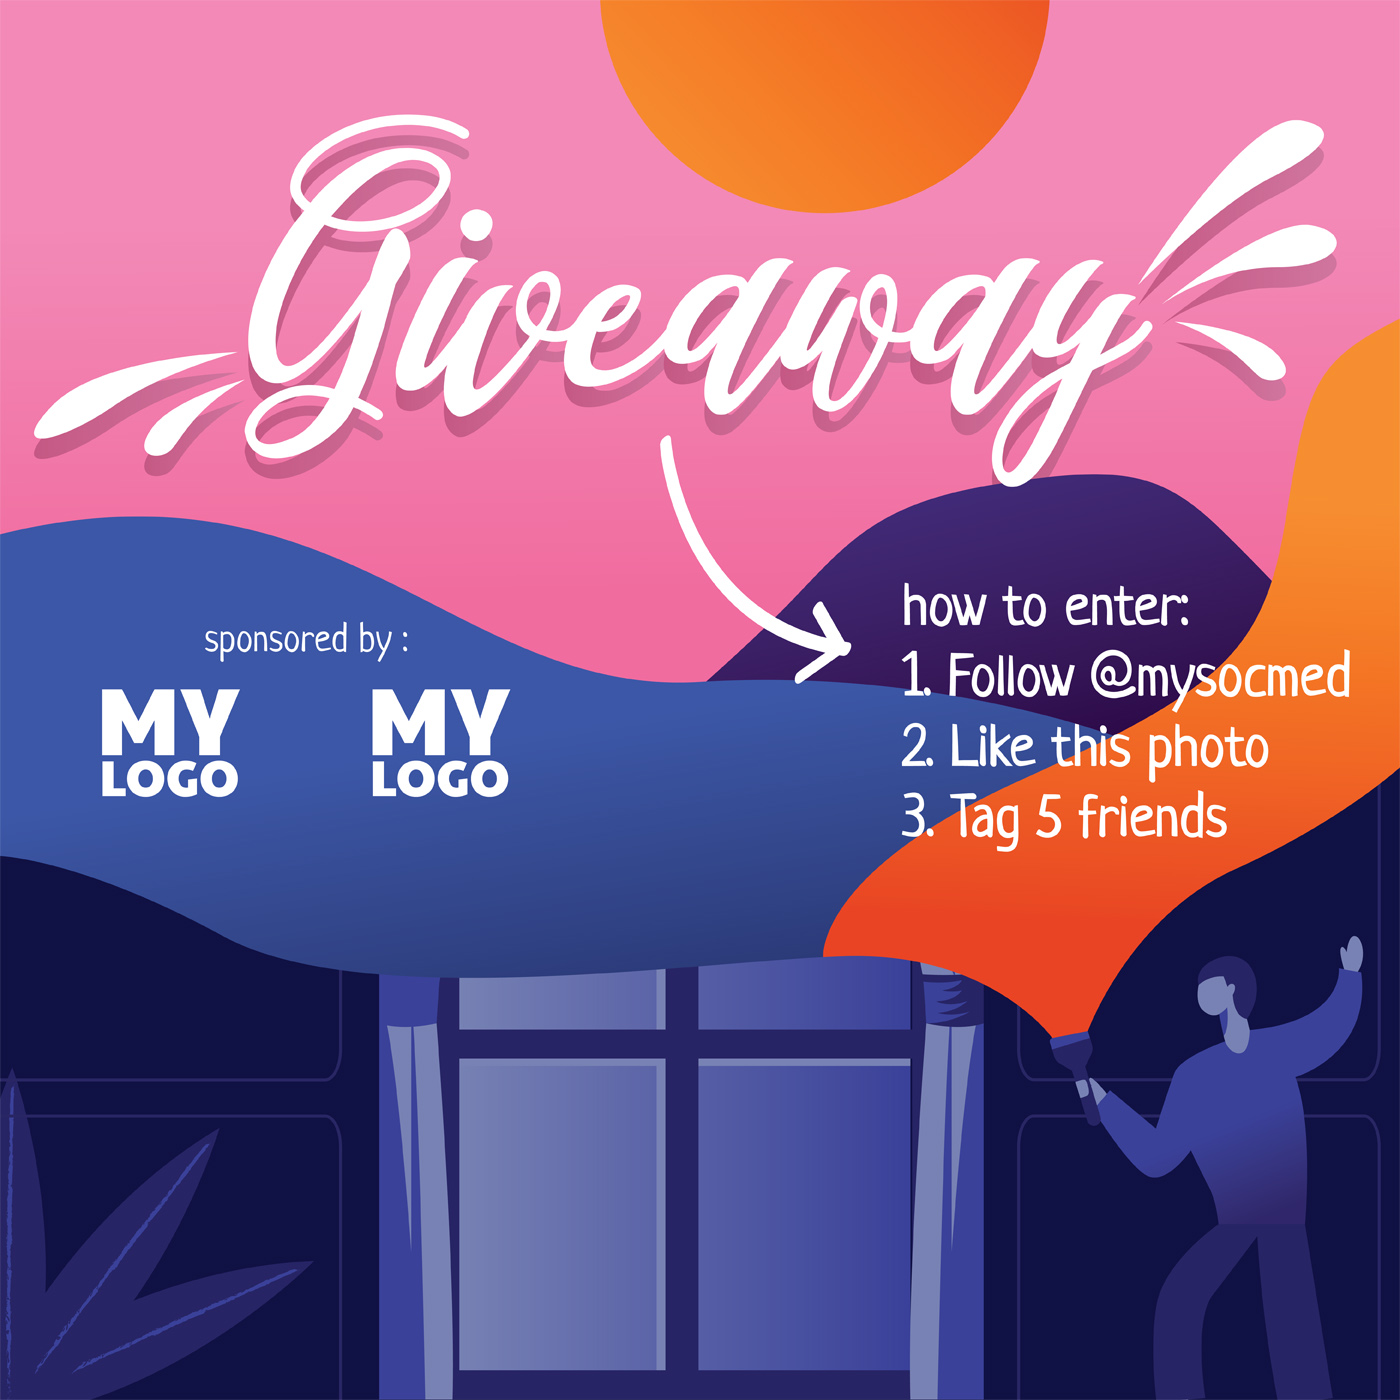 Giveaway Free Vector Art (57 Free Downloads)